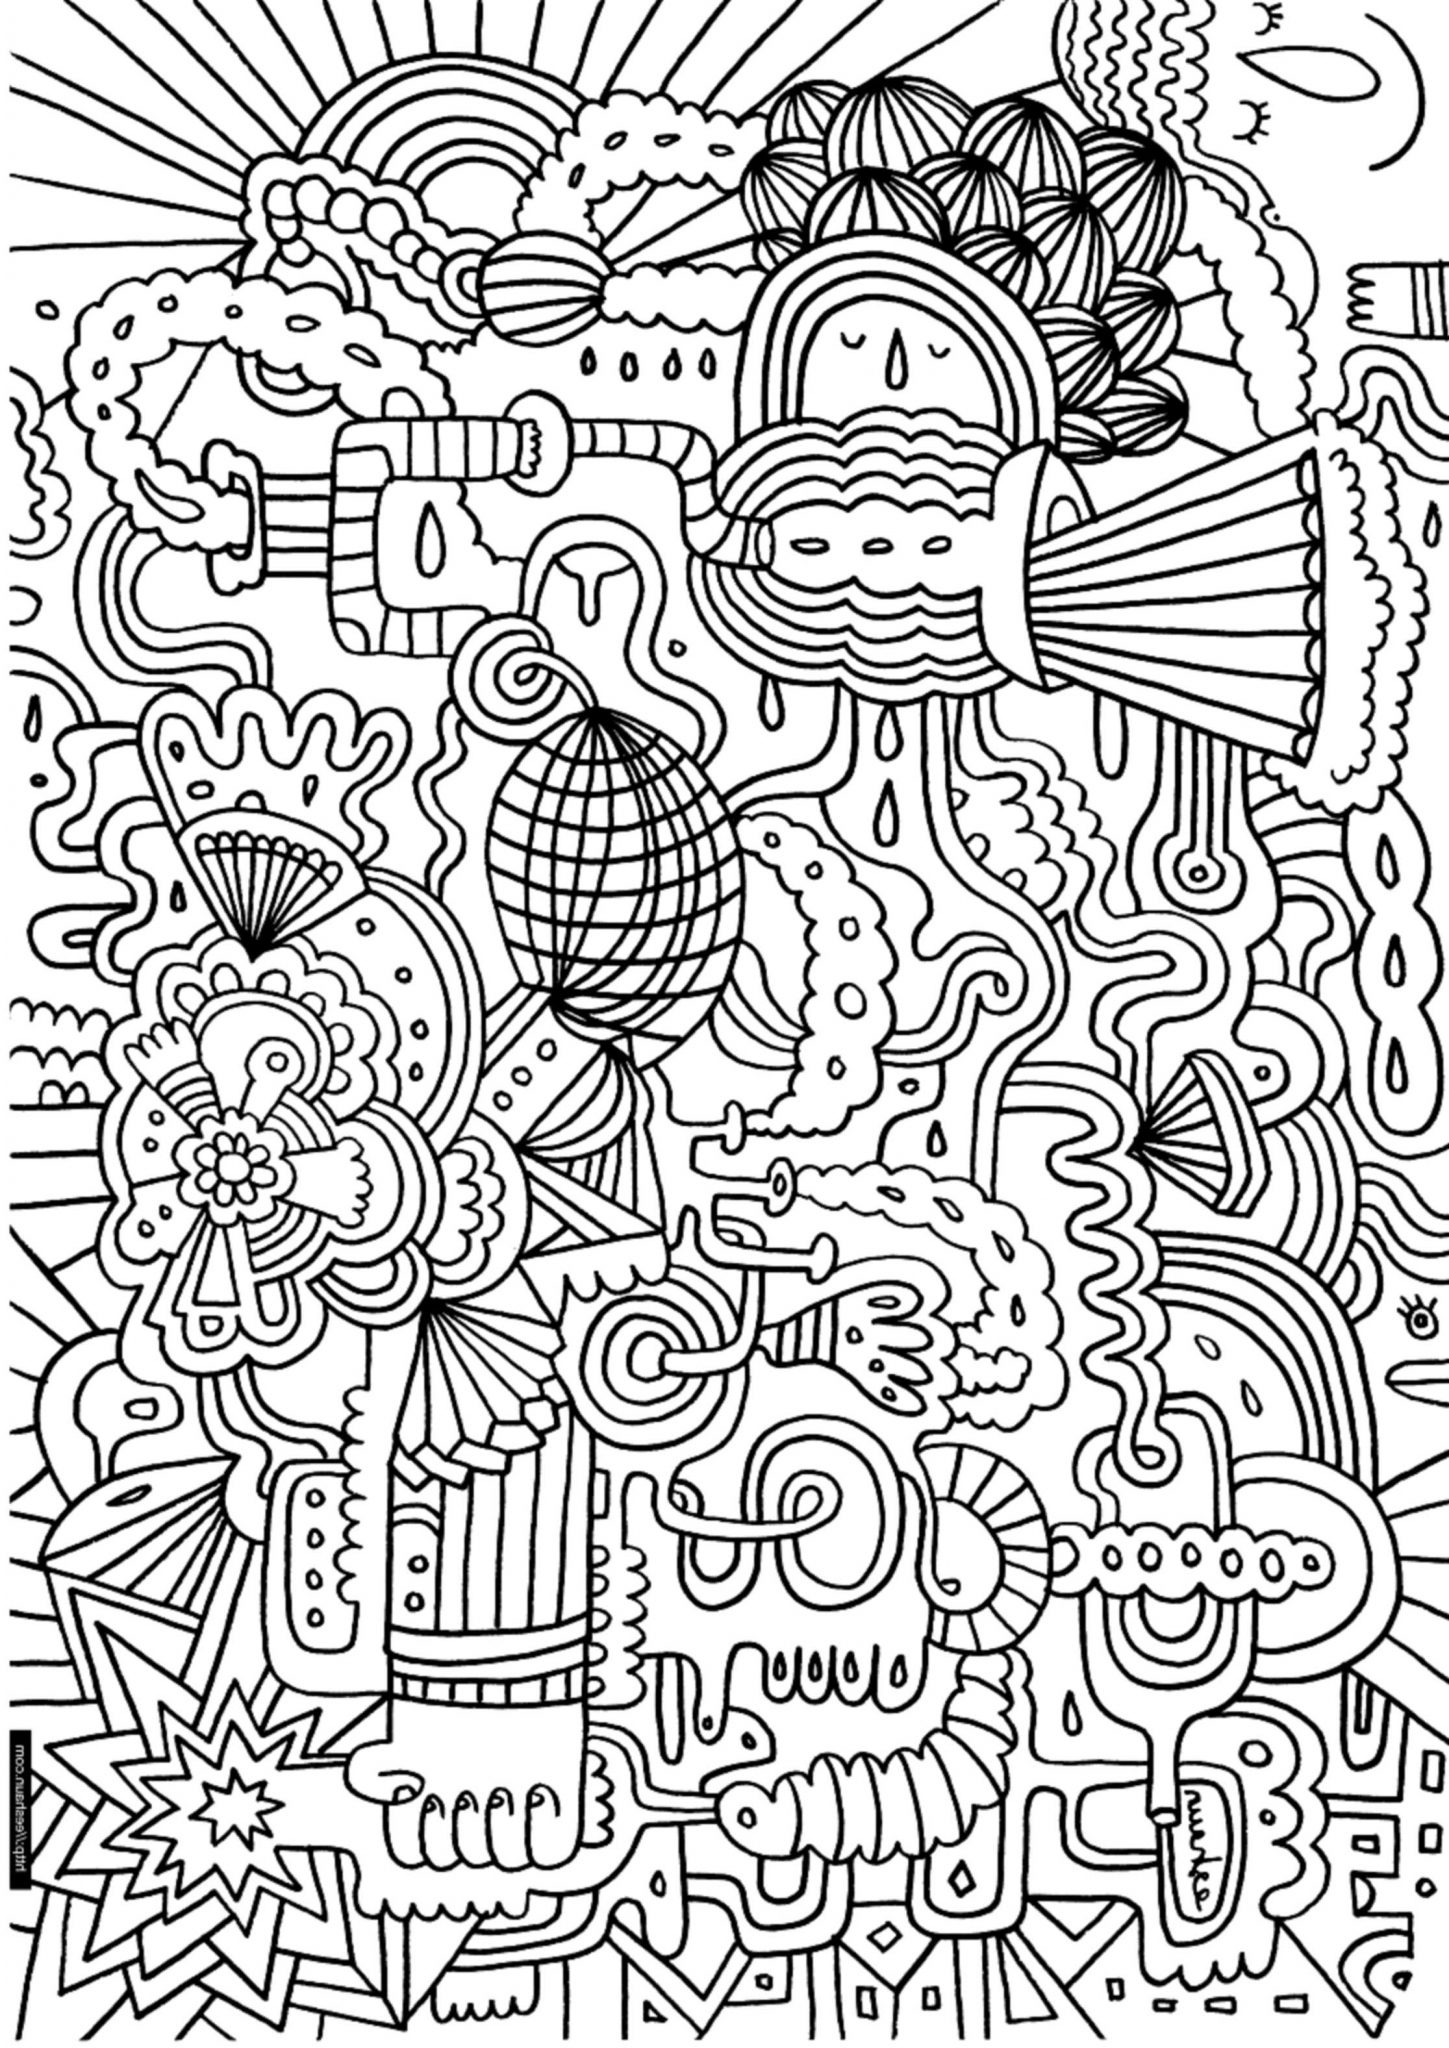 Download 15 Don T Worry Be Happy Coloring Pages | Top Free ...